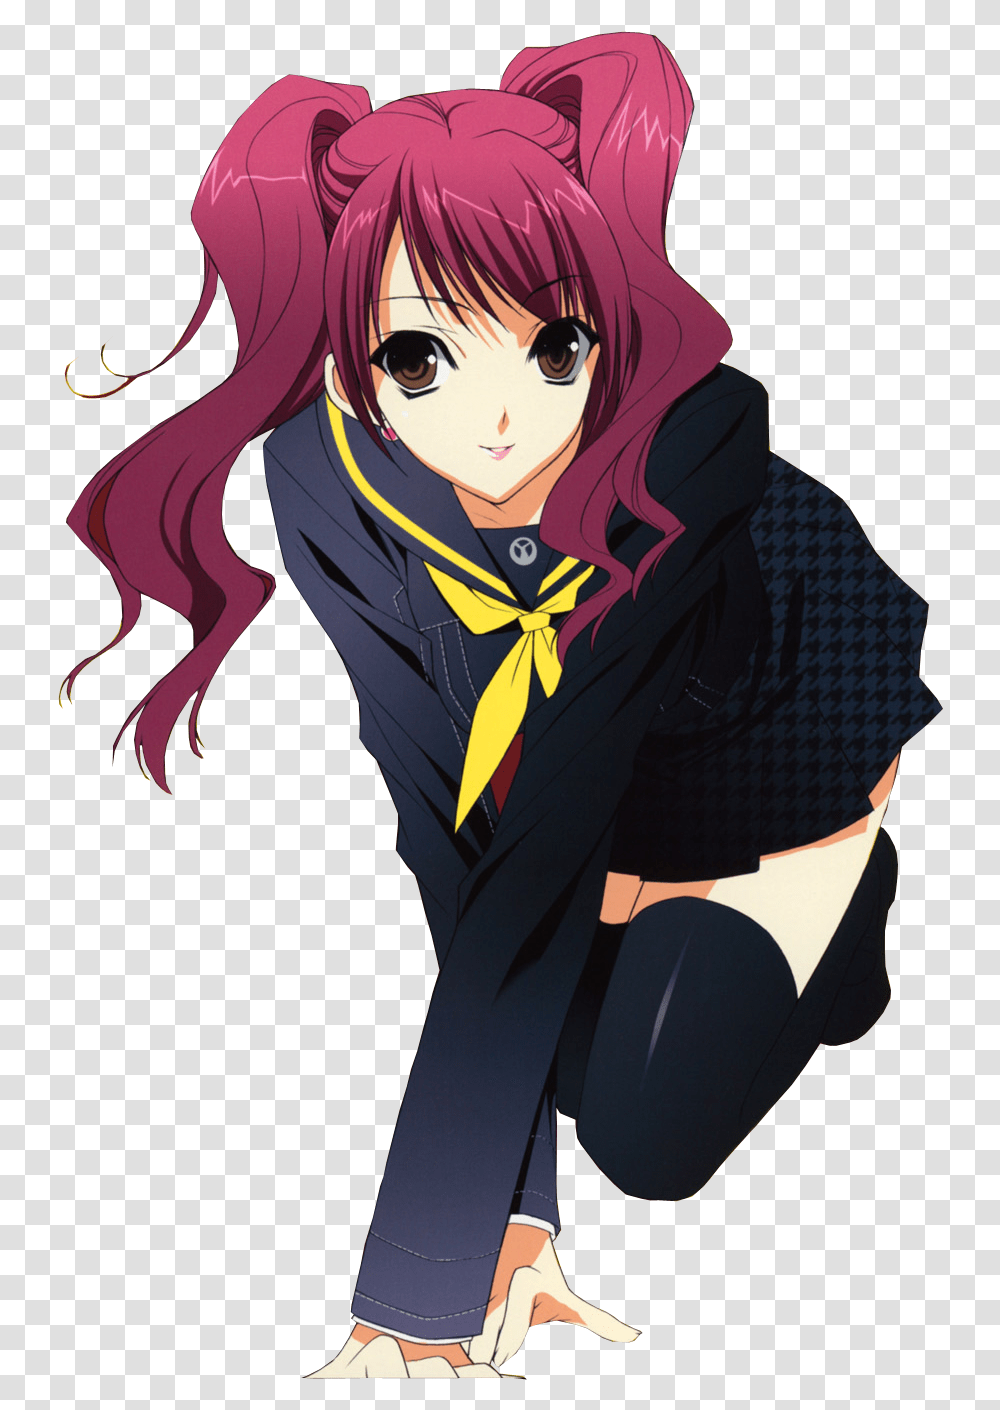 Anime Girl 30693 Free Icons And Backgrounds Anime Girl, Manga, Comics, Book, Person Transparent Png